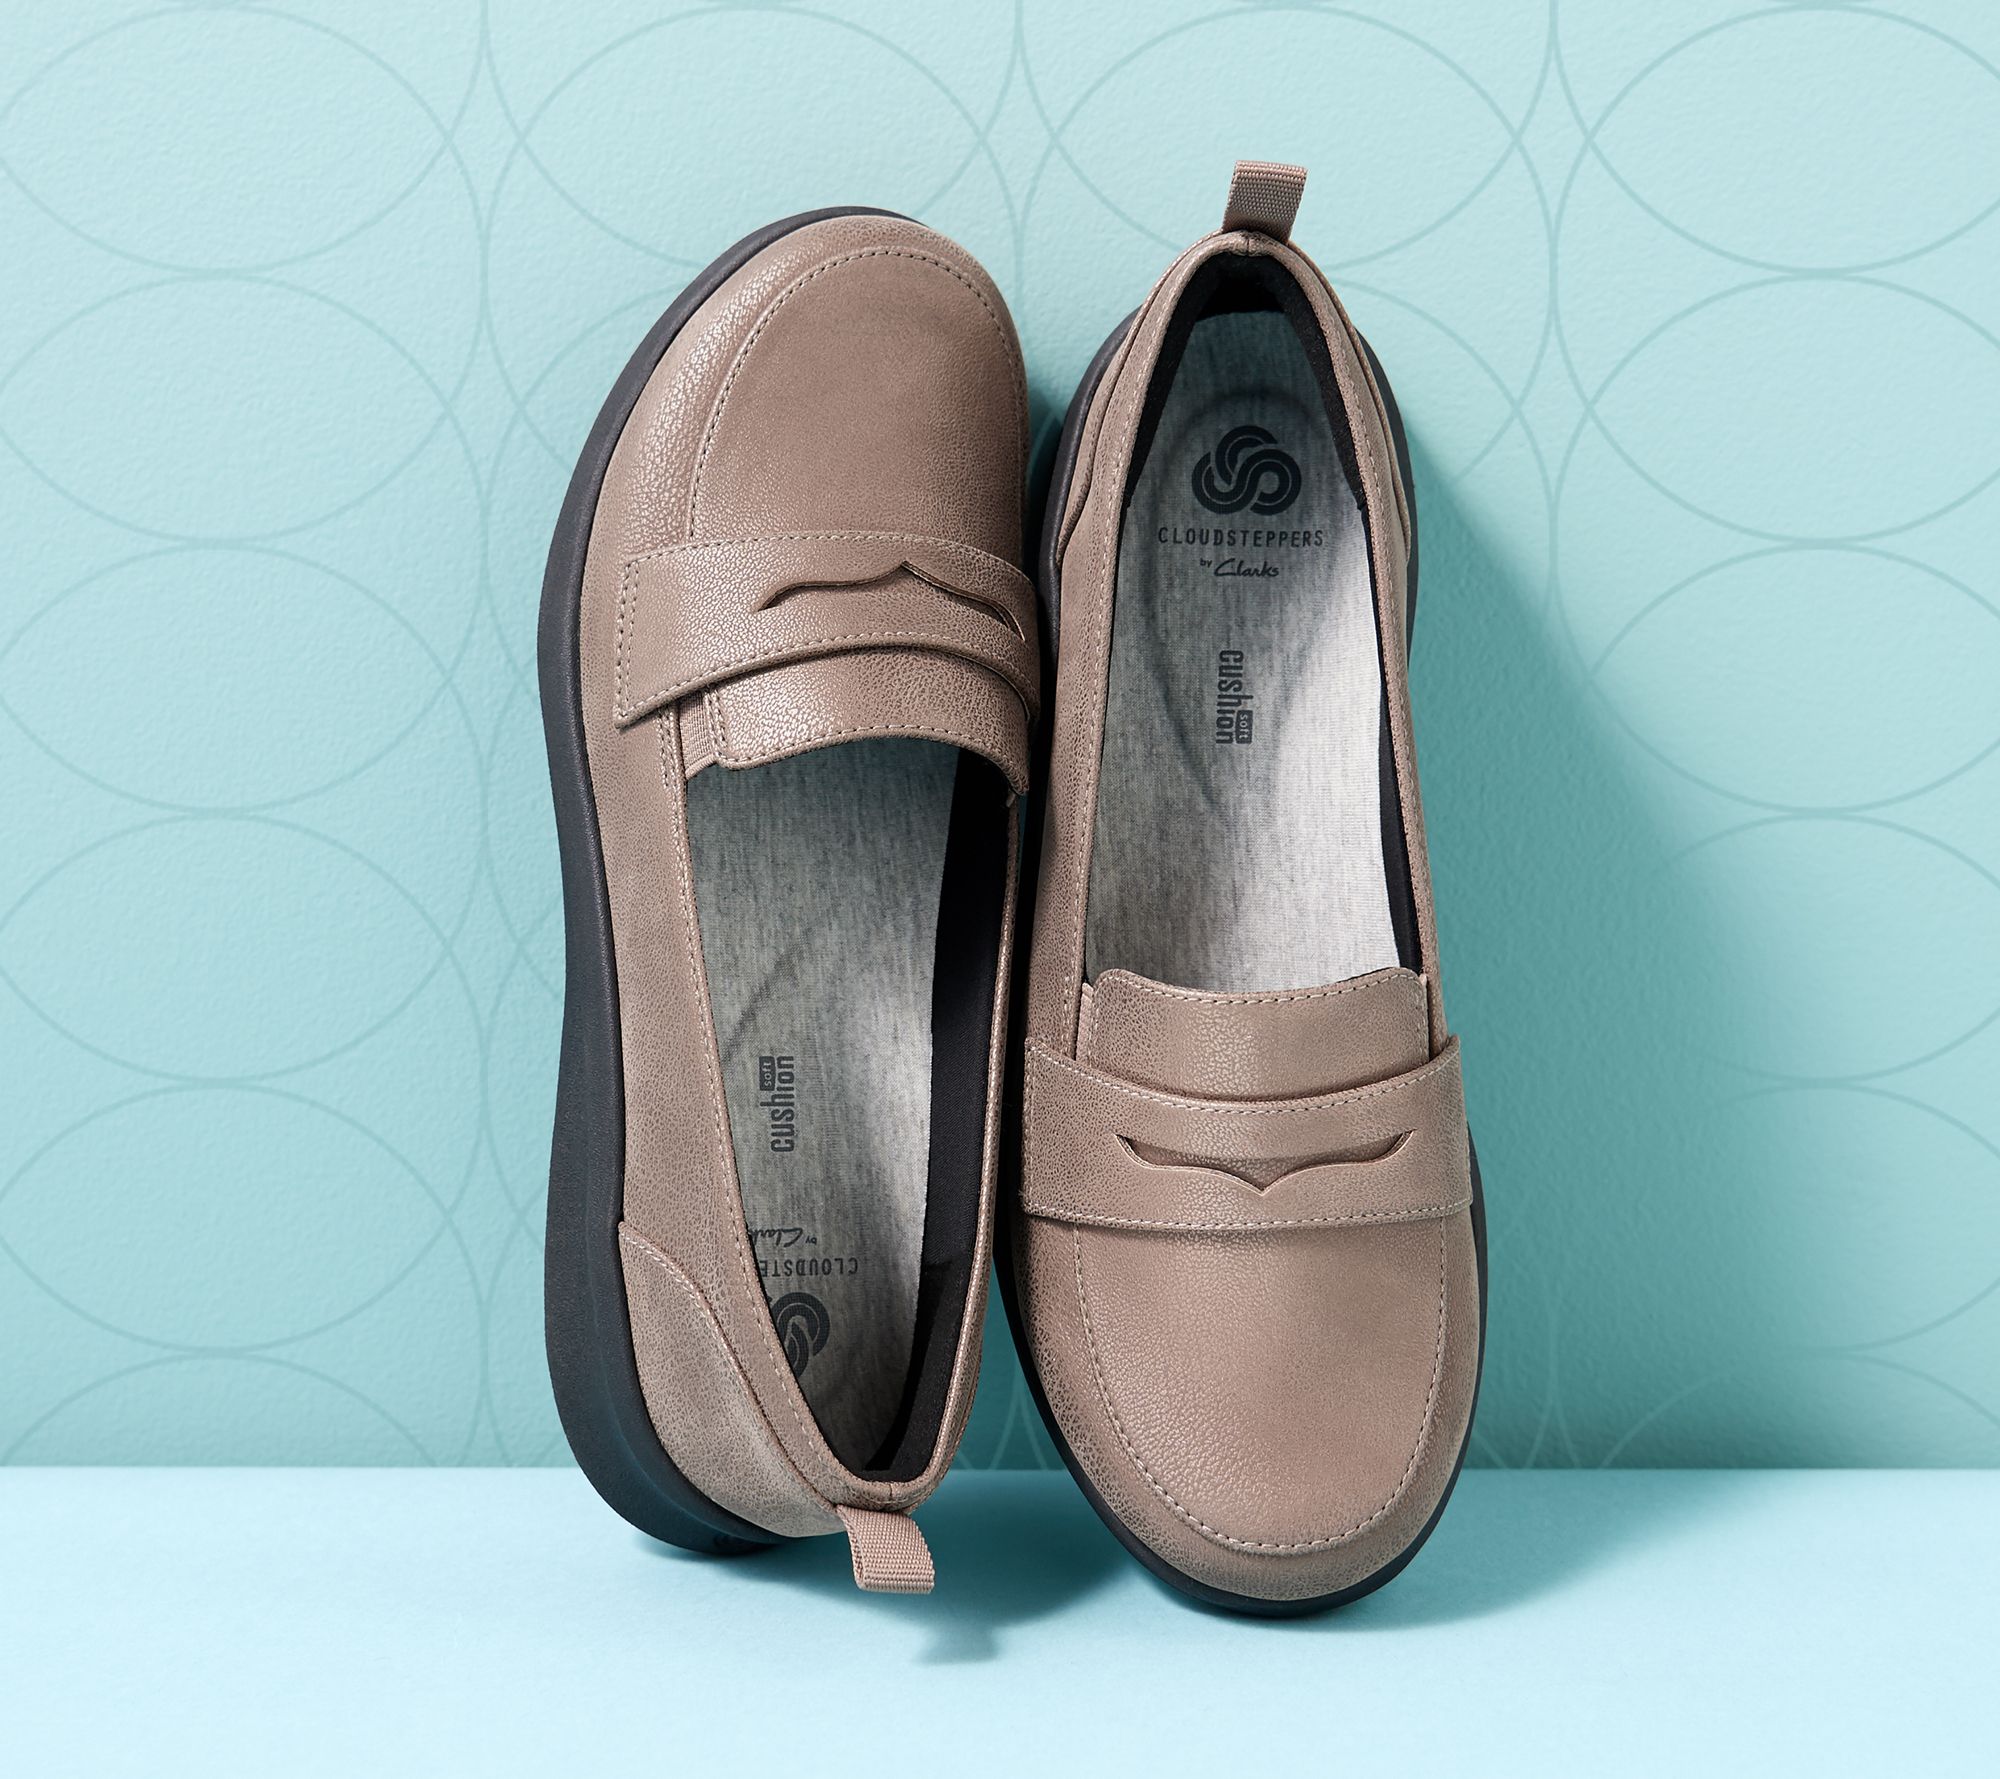 CLOUDSTEPPERS by Clarks Slip-On Loafers 